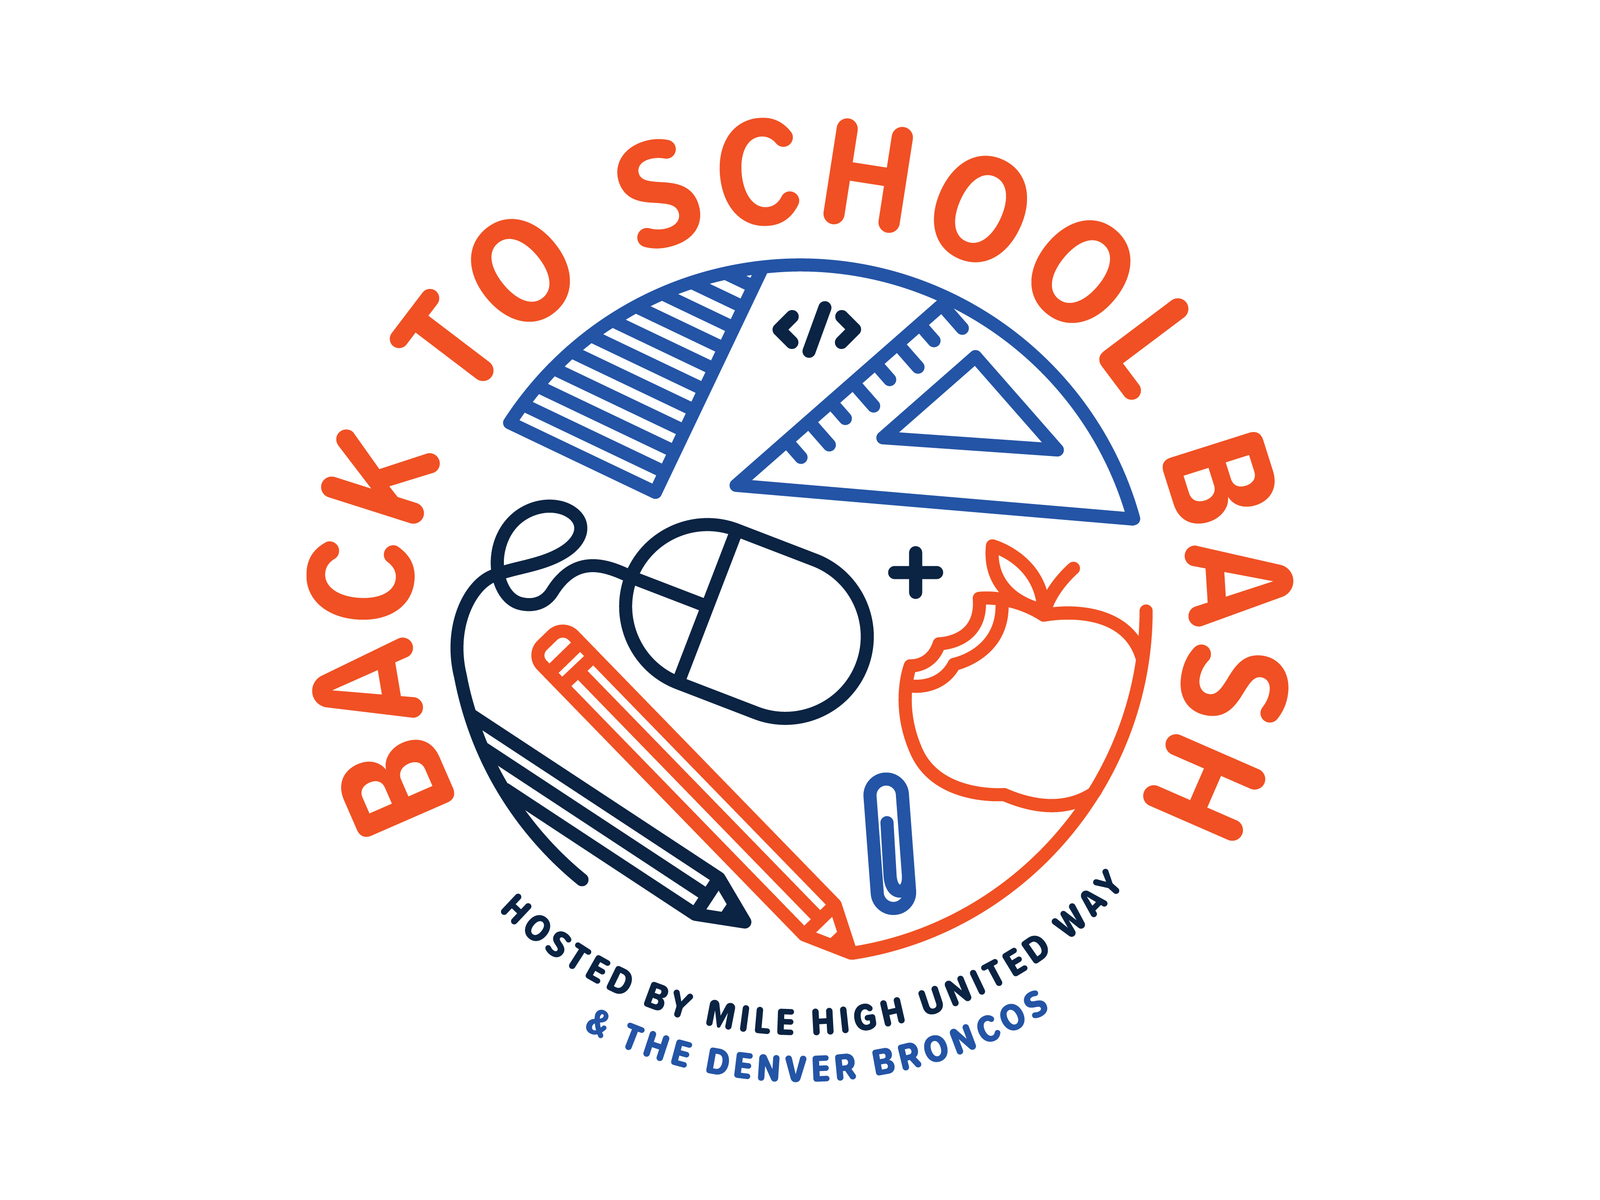 Back to School Bash Logo by Kristian Champagne Patton on Dribbble